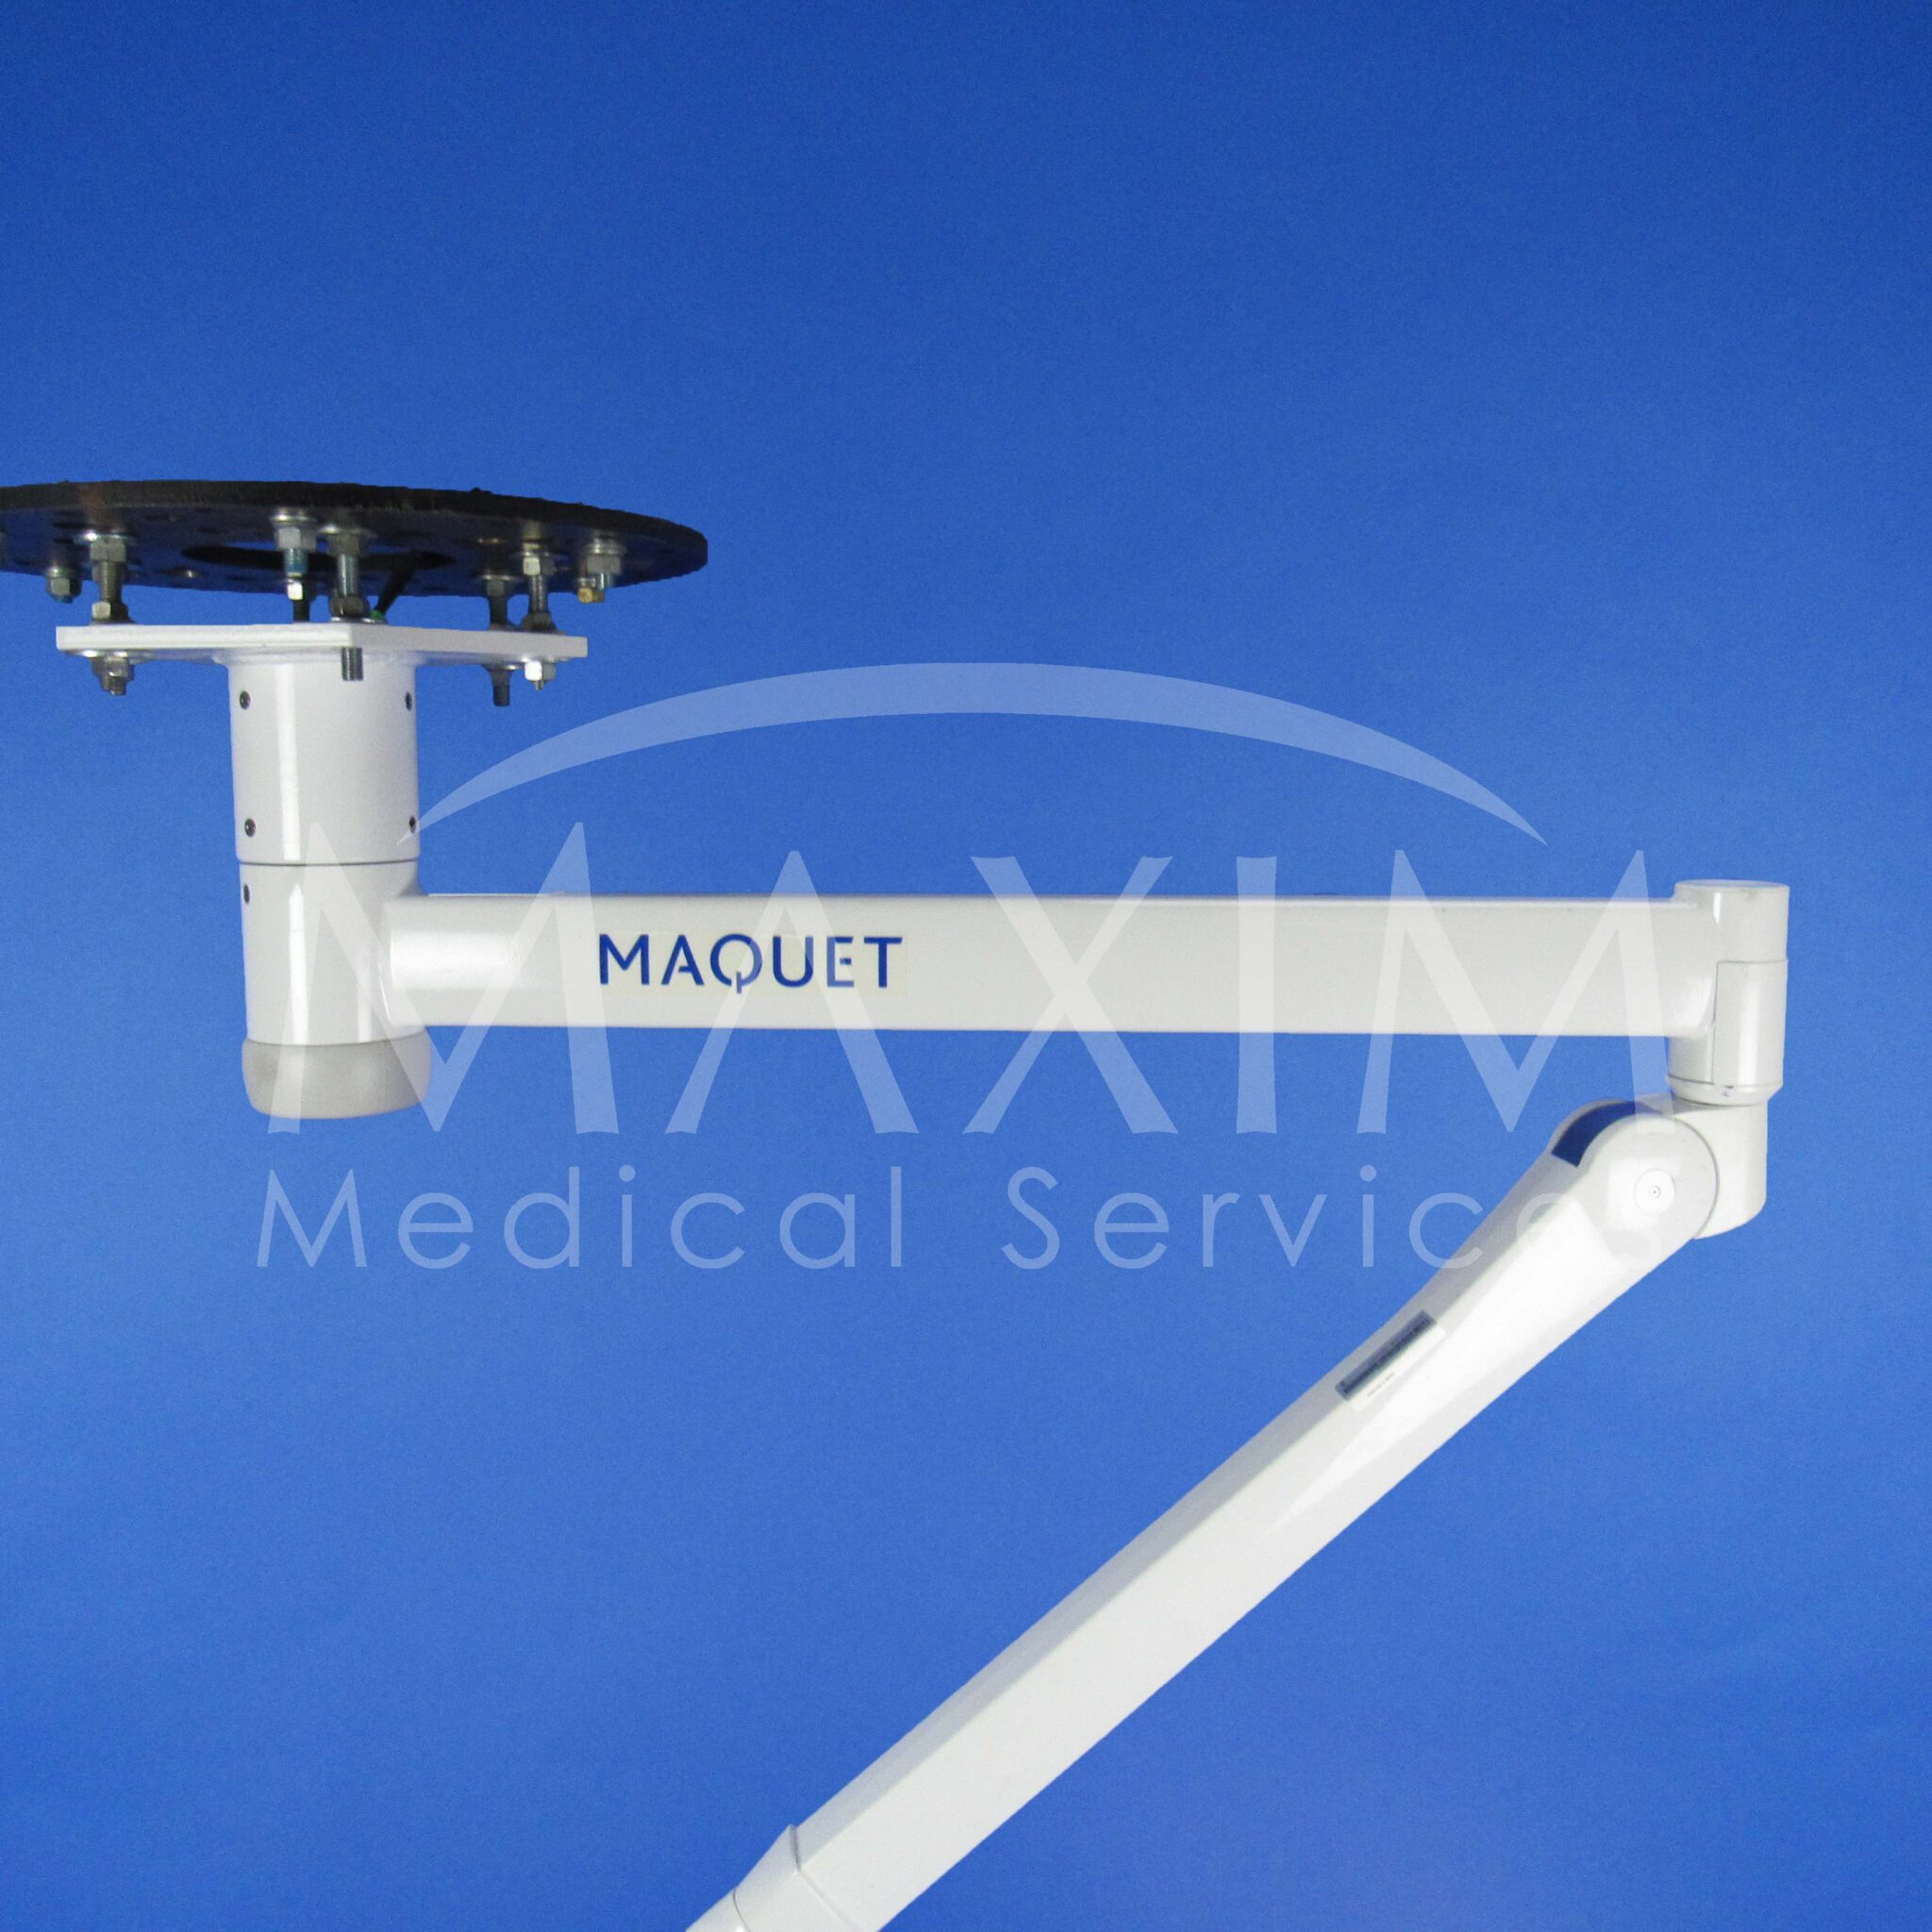 Maquet PowerLED 300 Single 3-Pole Low-Ceiling Surgical Light System